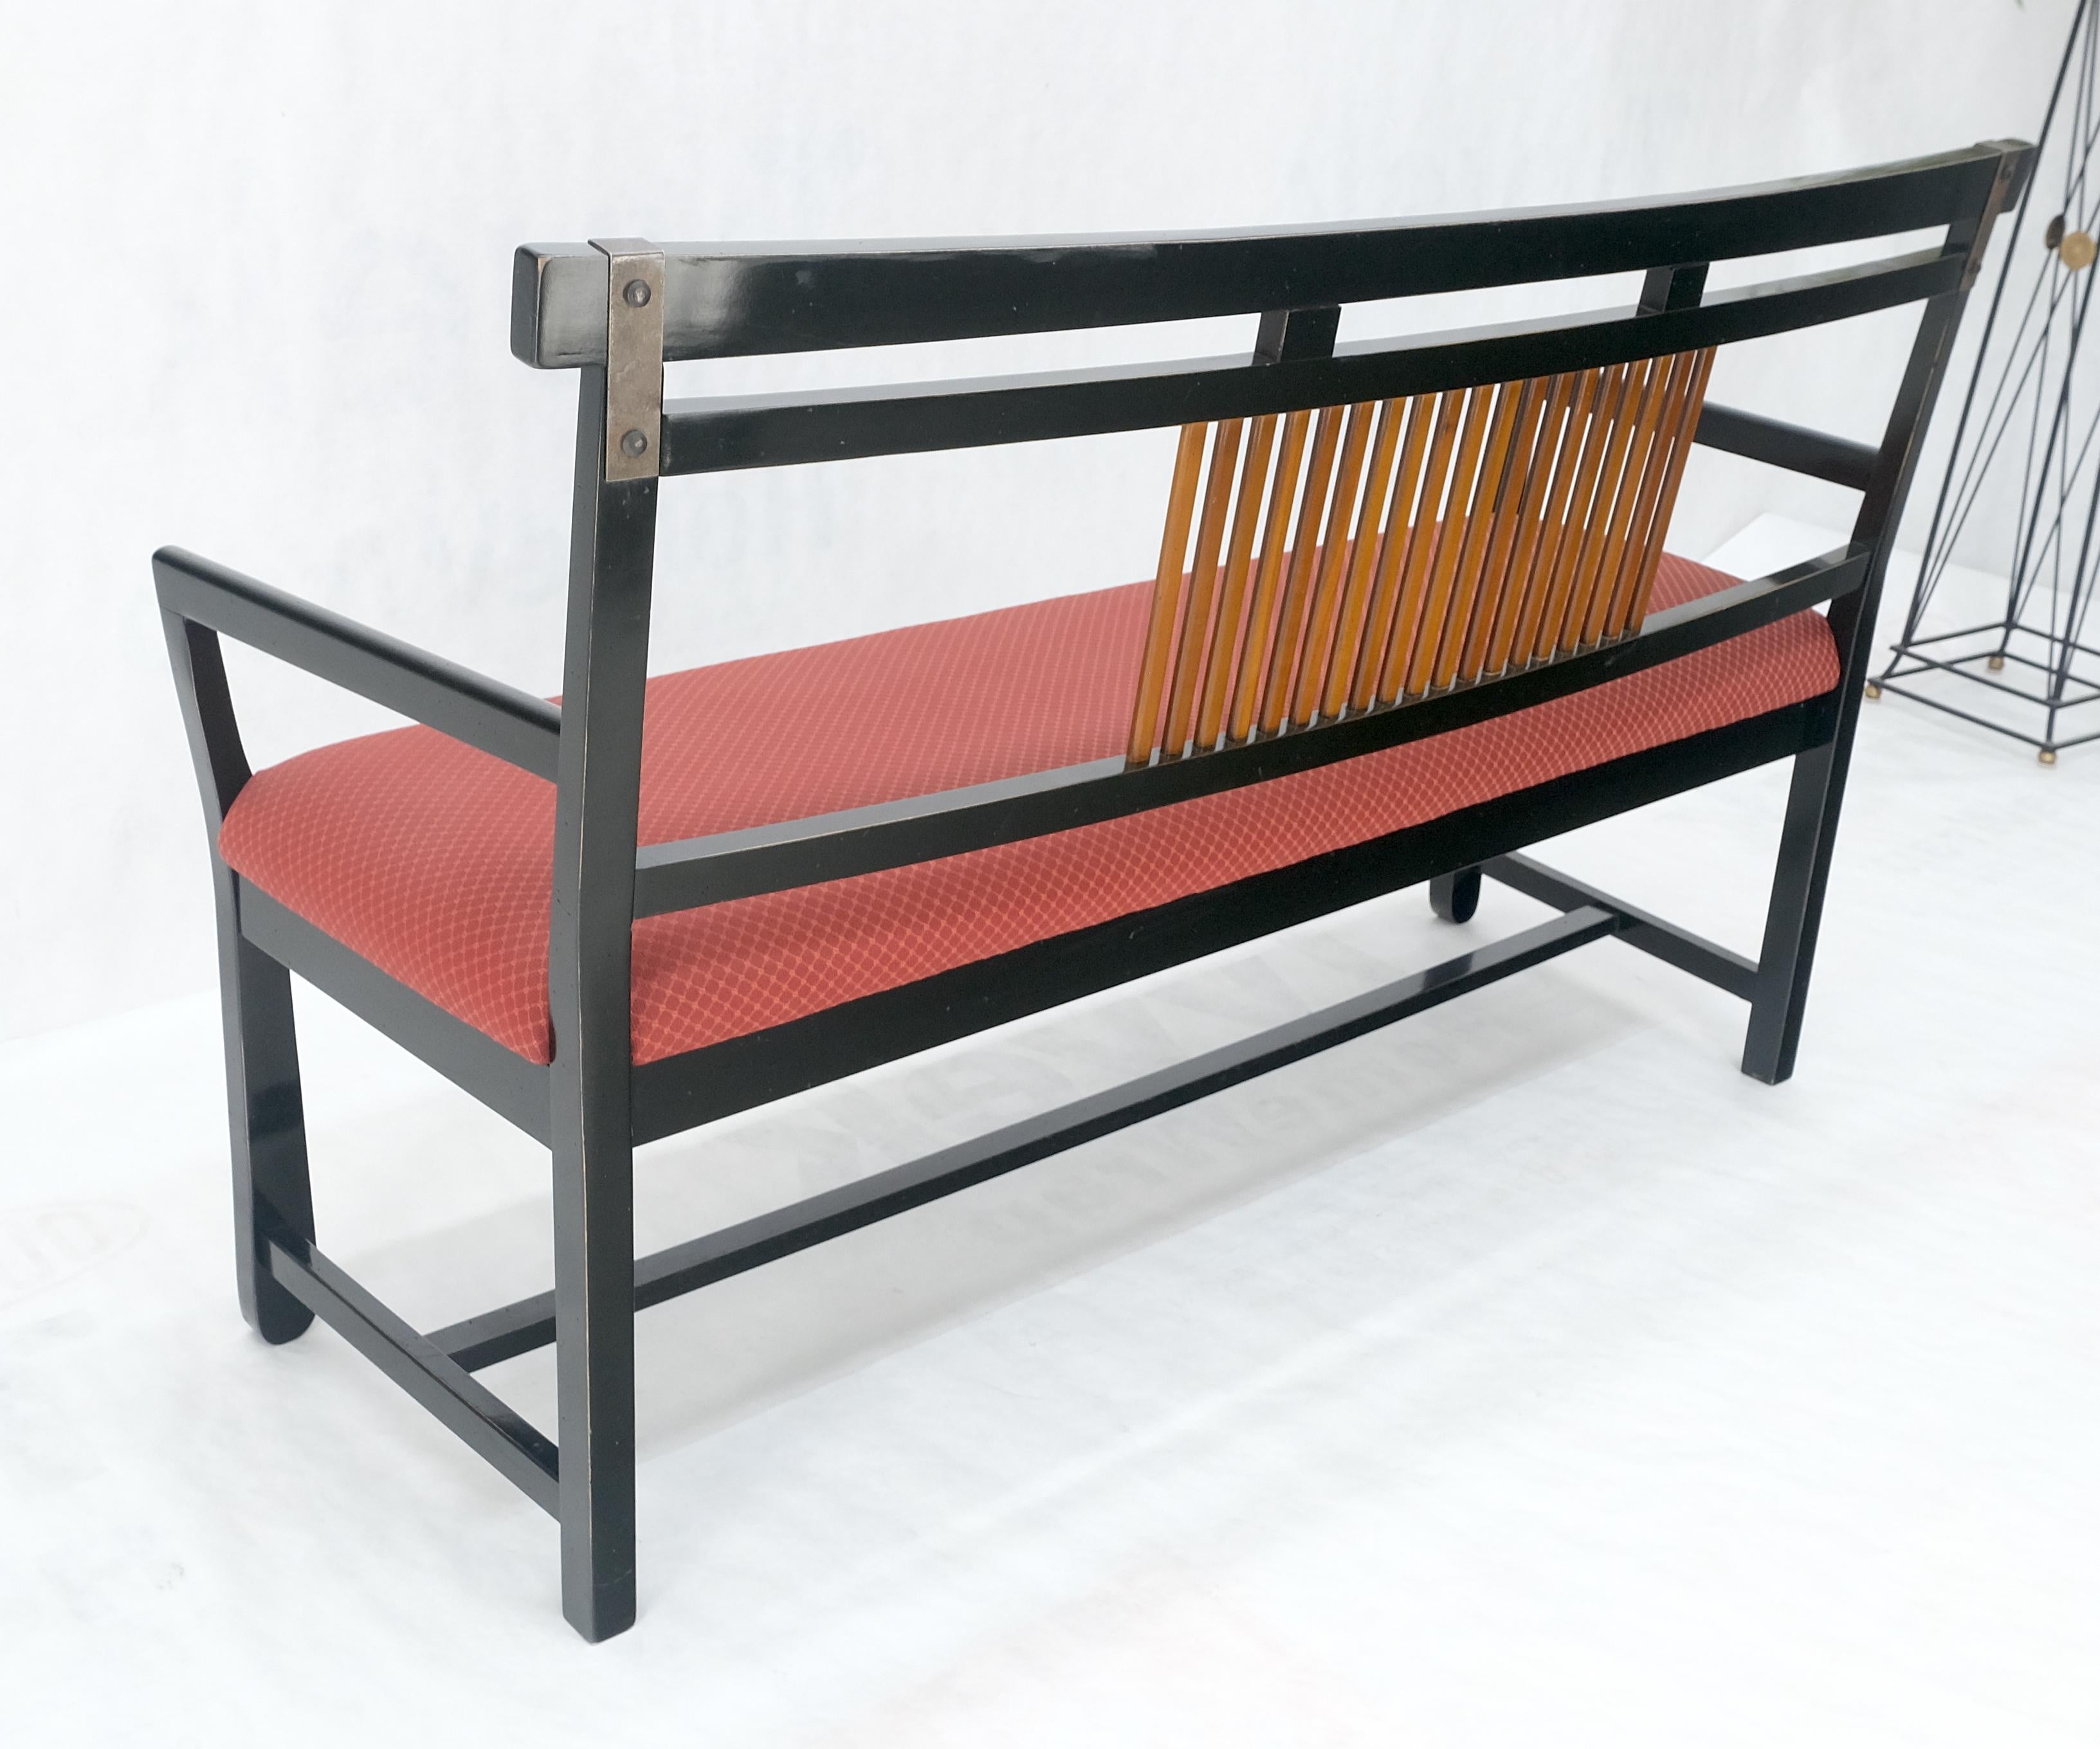 Vintage Black Lacquer Red Upholstery Bench w/ Arms Slotted Back MINT For Sale 5